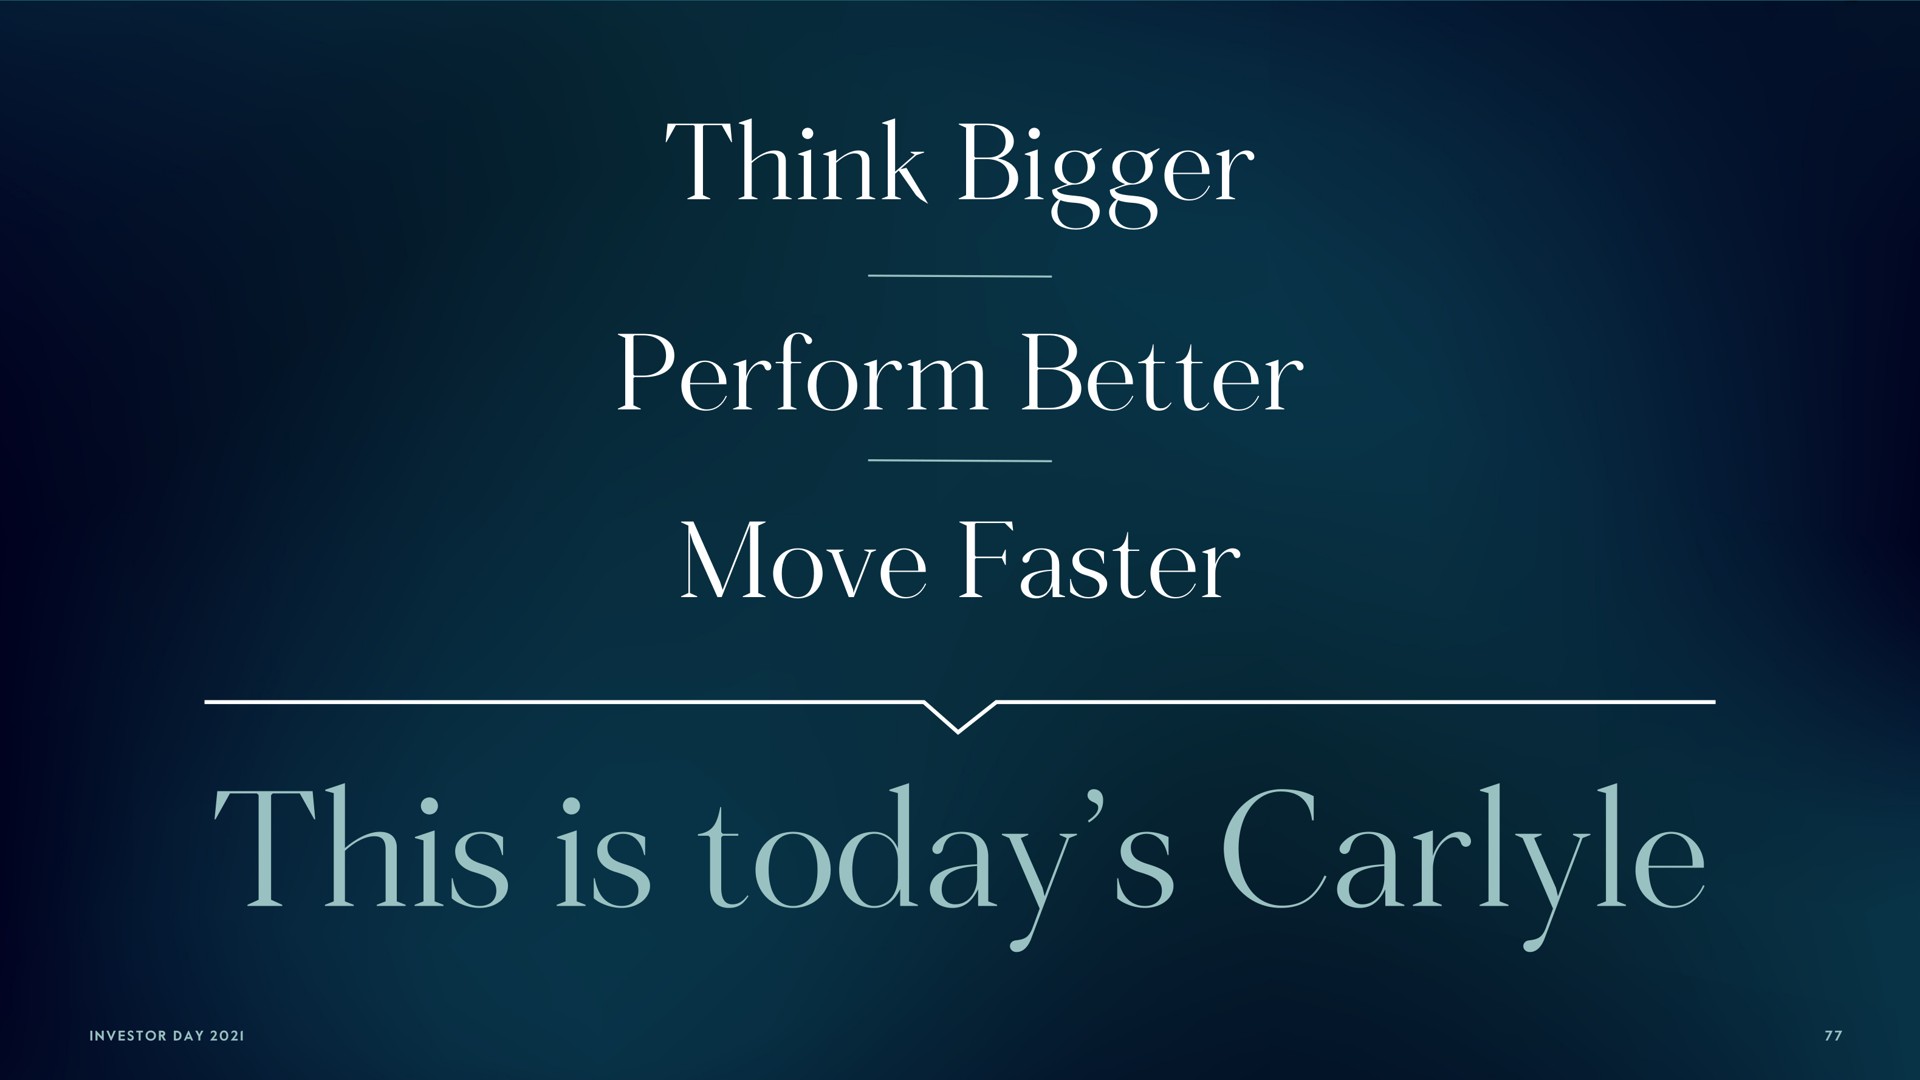 think bigger perform better move faster this is today | Carlyle